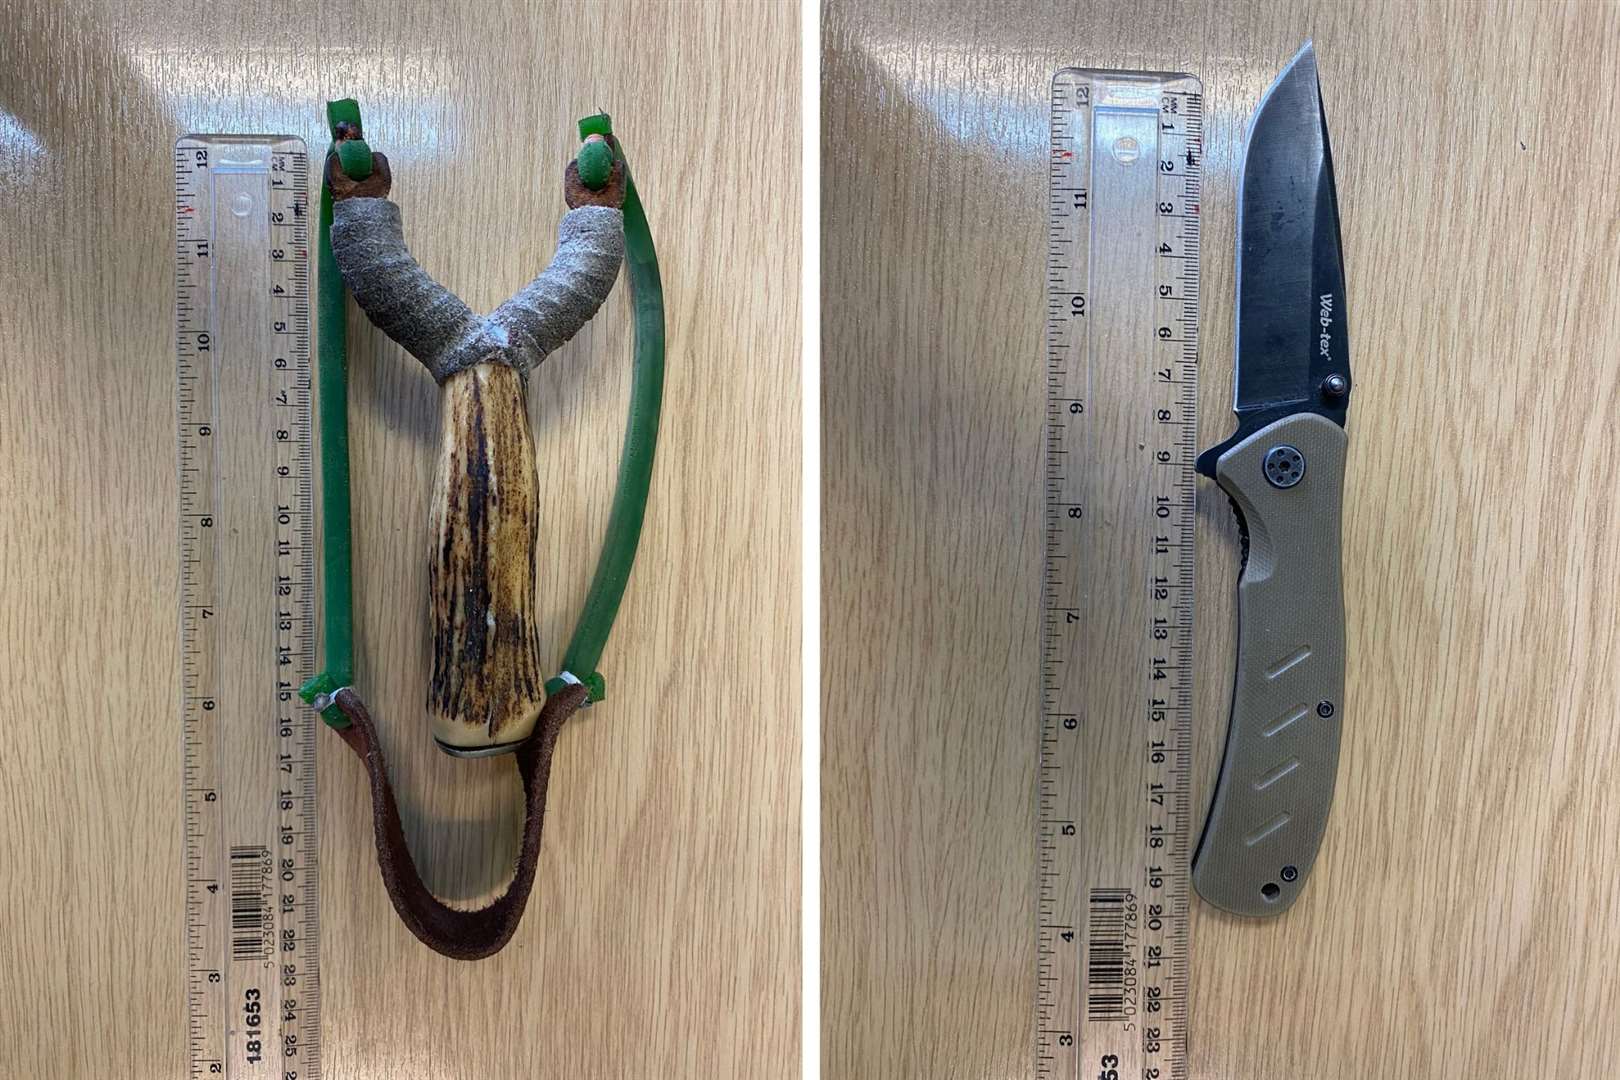 A catapult and knife were seized. Photo: British Transport Police